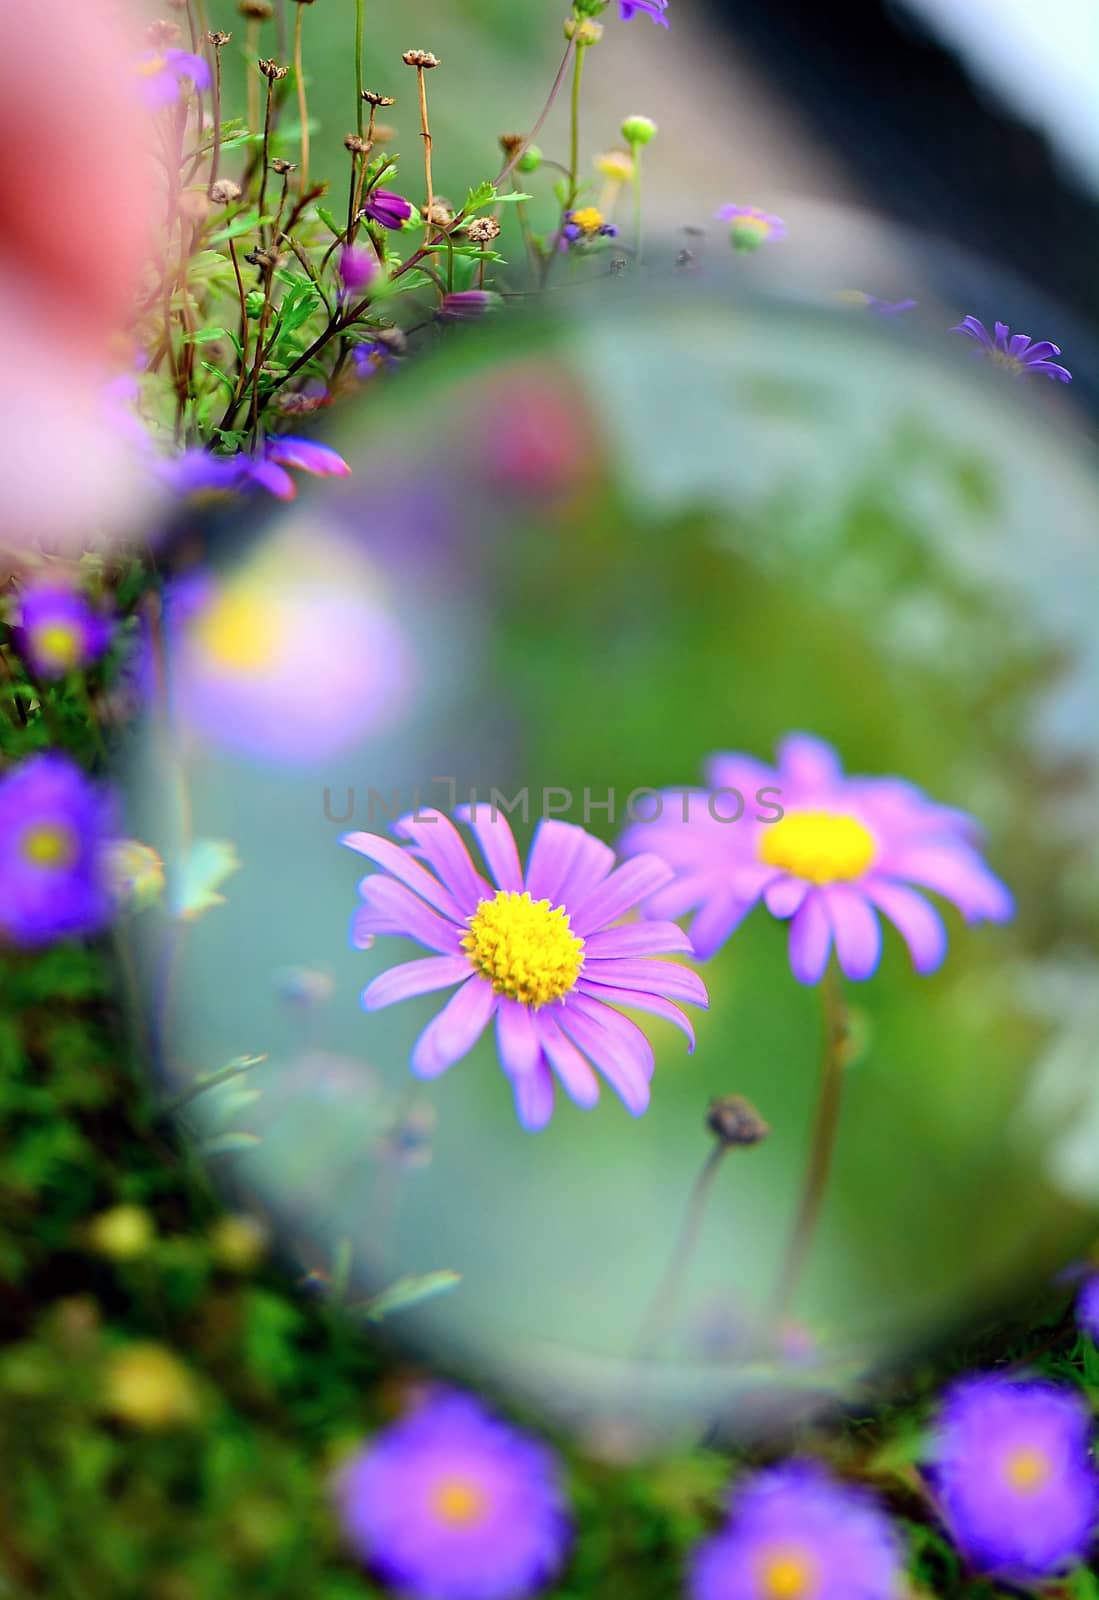 Flower under magnifying glass. by hamik